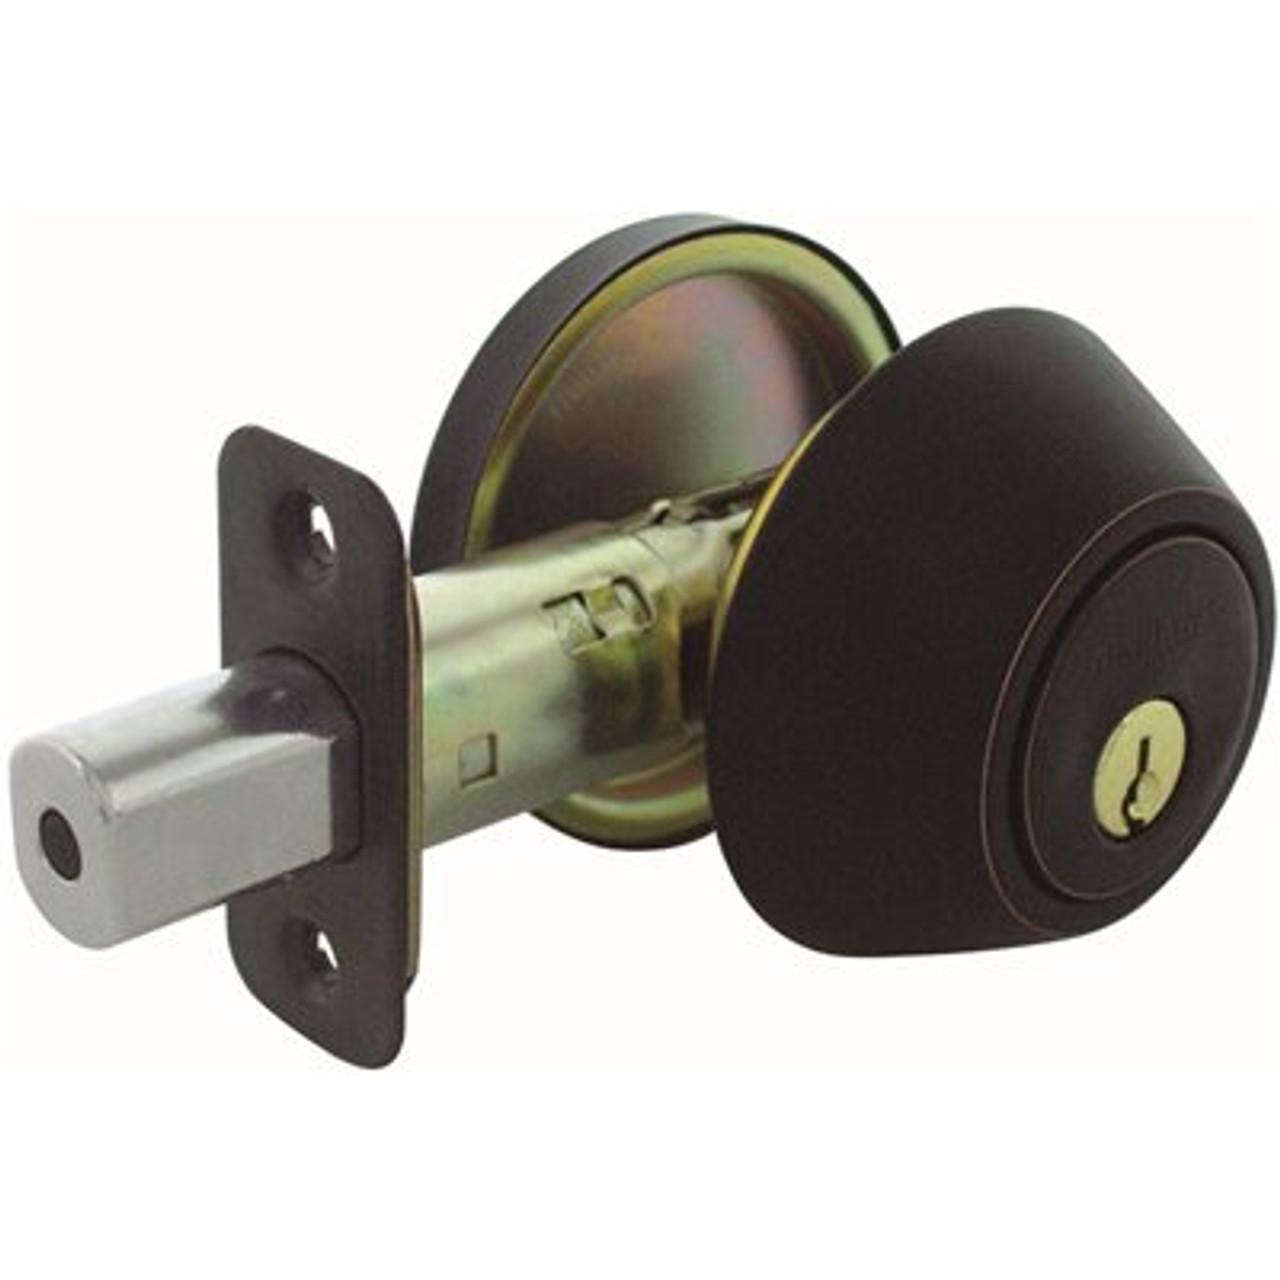 Defiant Aged Bronze Single Cylinder Deadbolt With Kw1 Keyway Keyed Differently